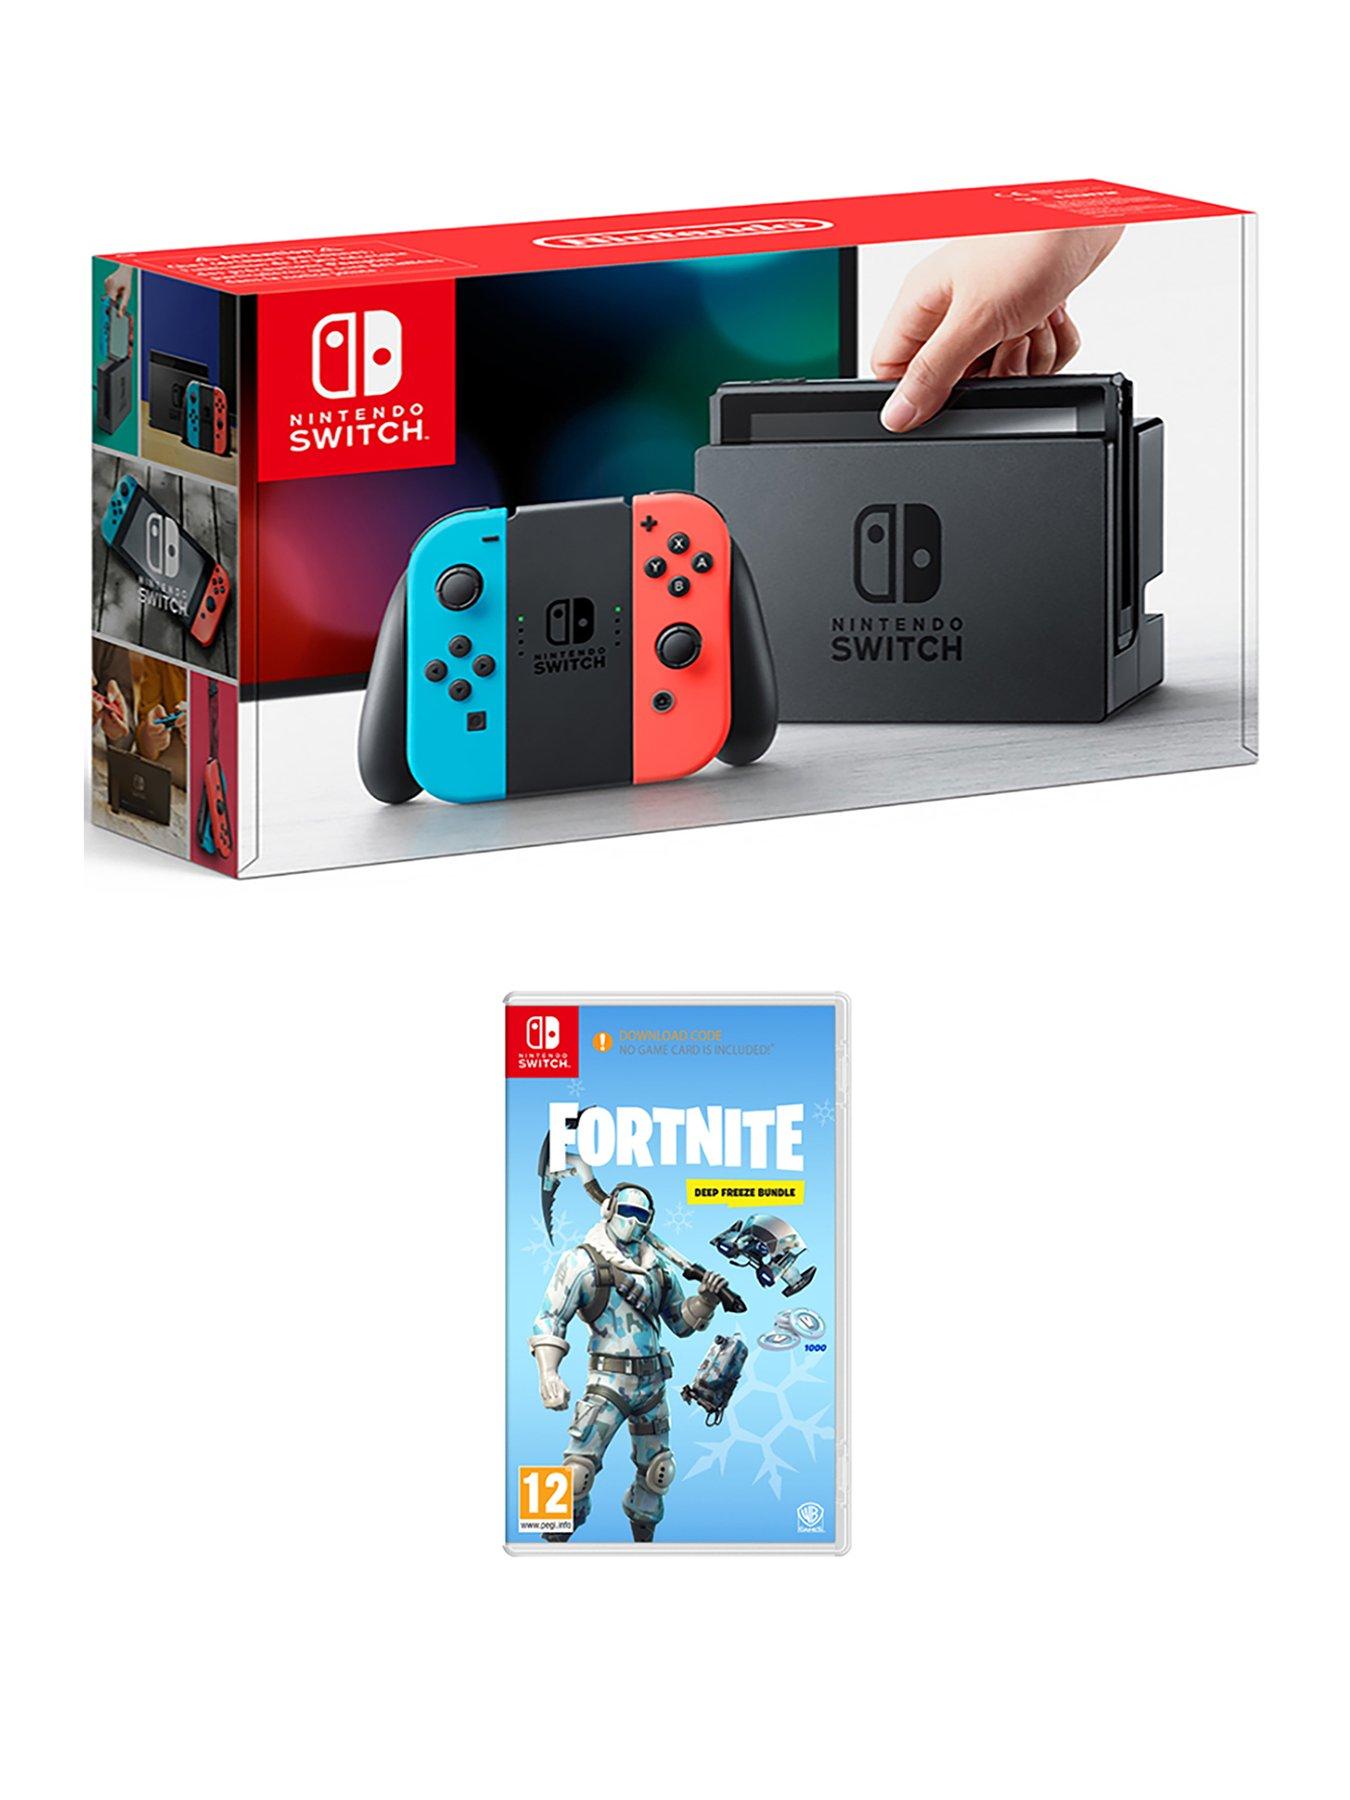 nintendo switch neon console with fortnite deep freeze bundle - fortnite deep freeze bundle code